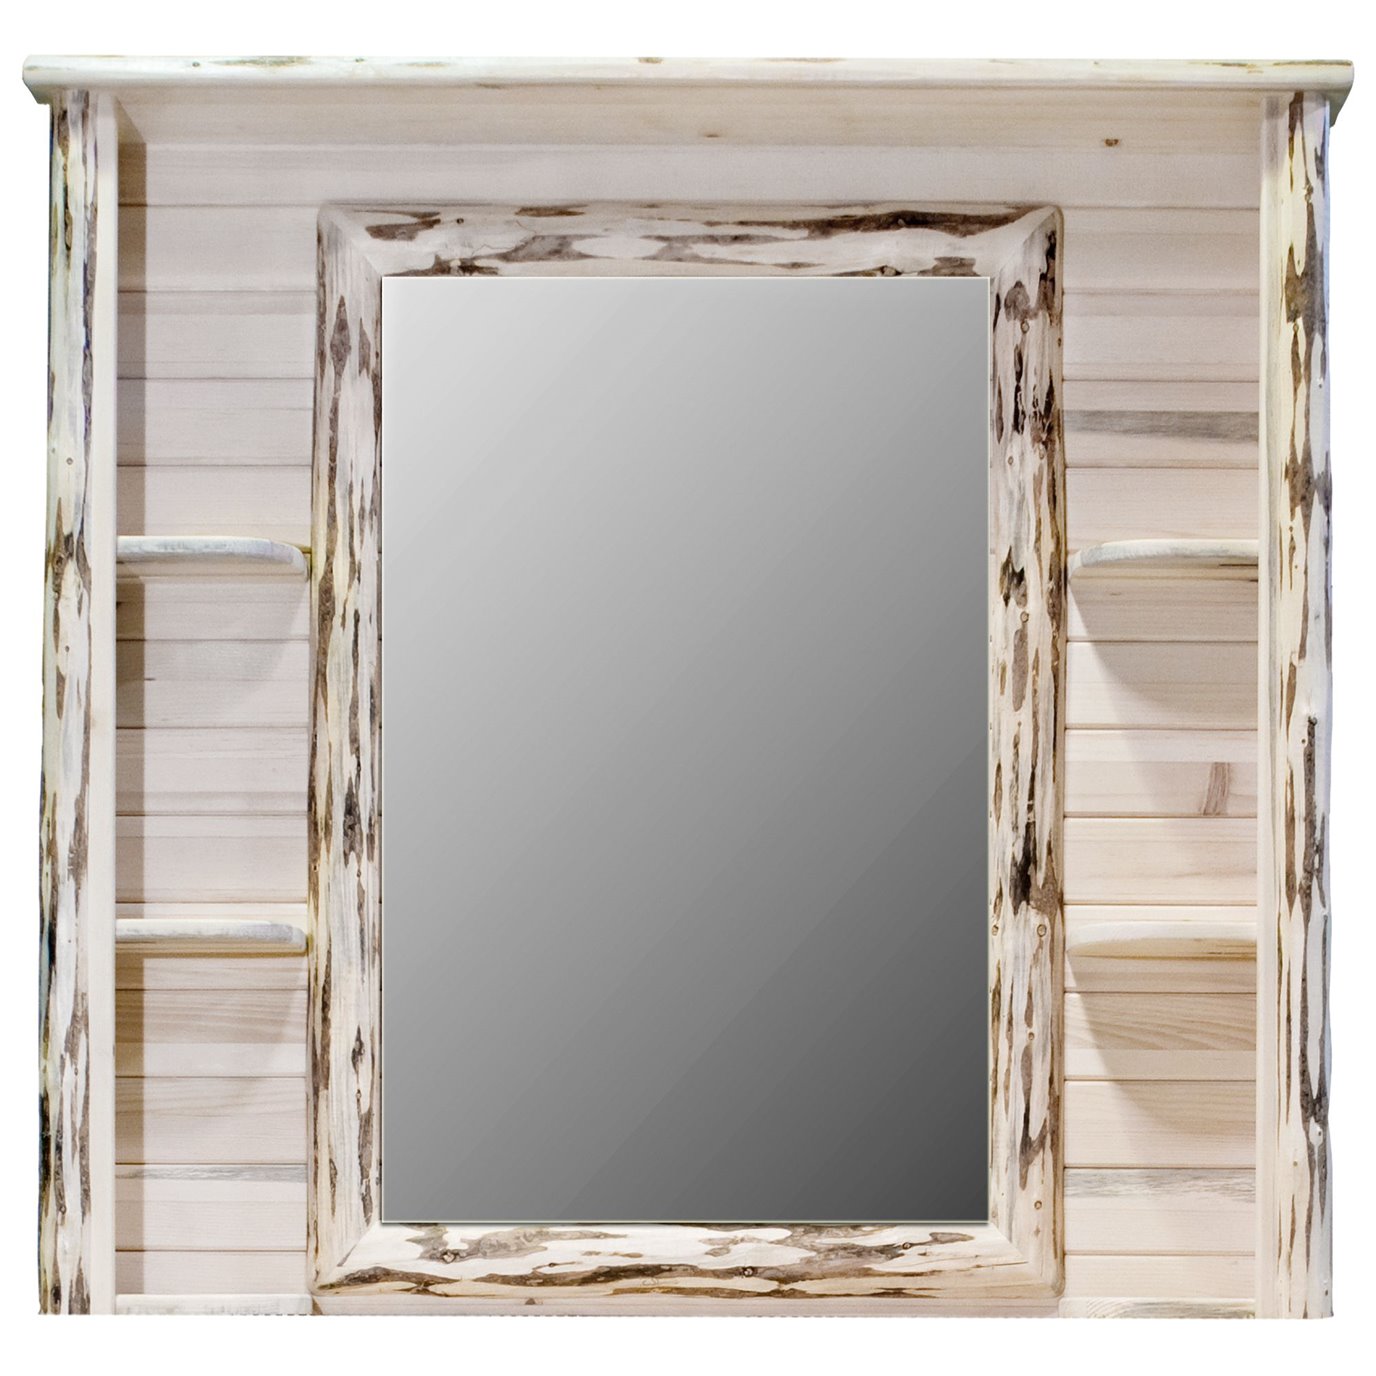 Montana Deluxe Dresser Mirror - Clear Lacquer Finish